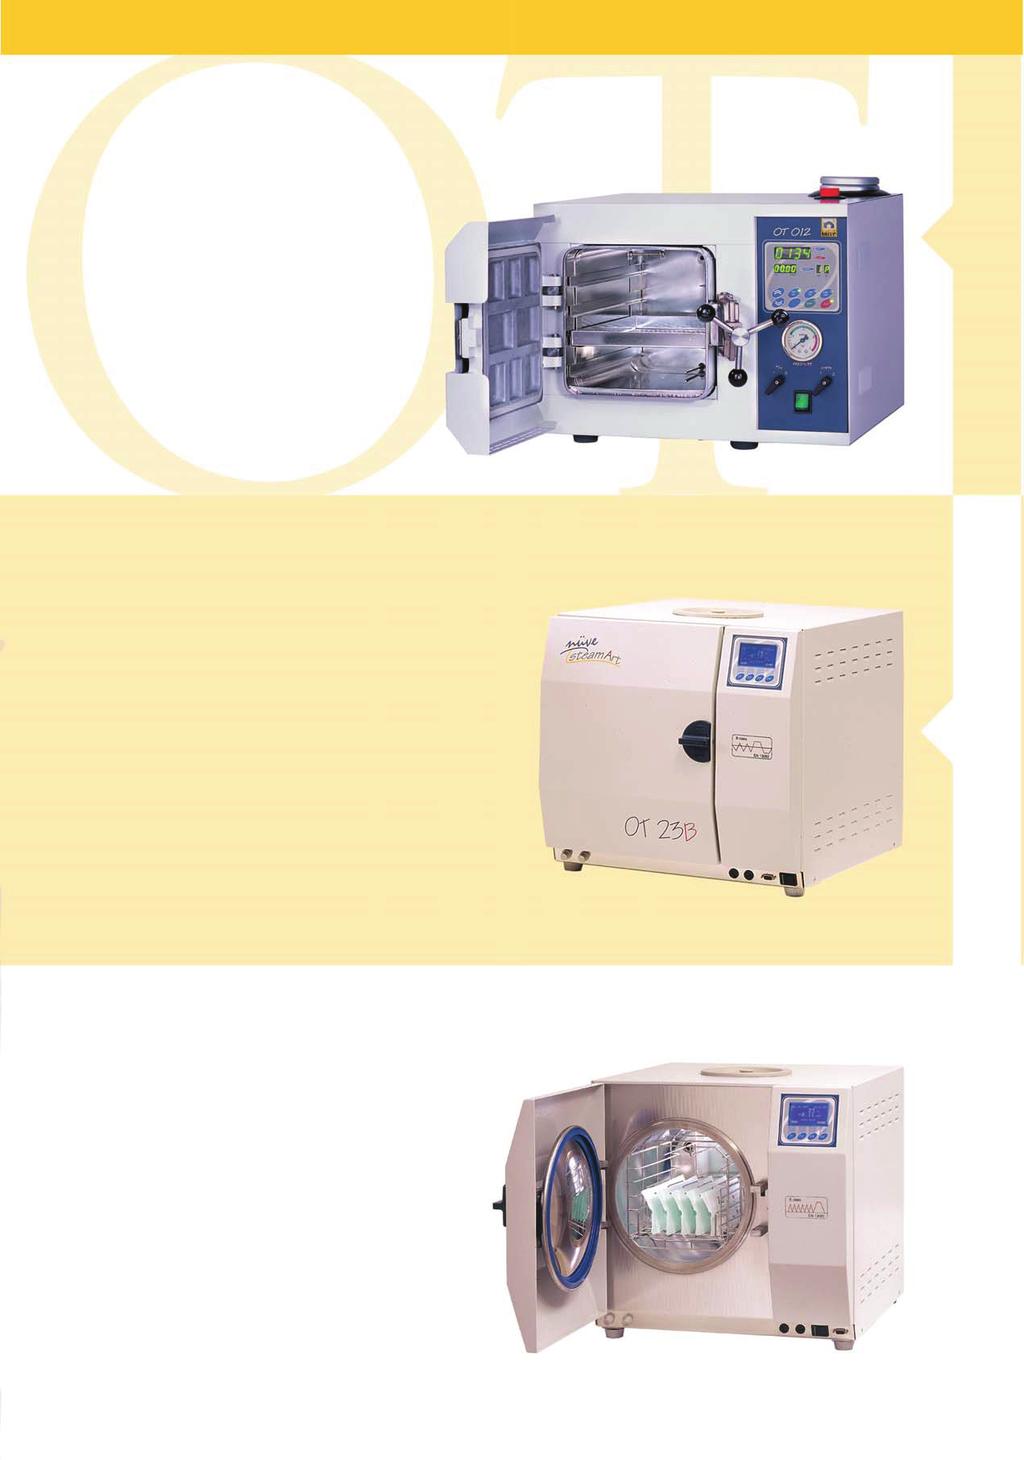 OT 012 BENCH TOP STEAM STERILIZER Chamber volume: 12 liters. Temperature range: 110 C / 140 C. Used for the sterilization of unwrapped medical or dental instruments.